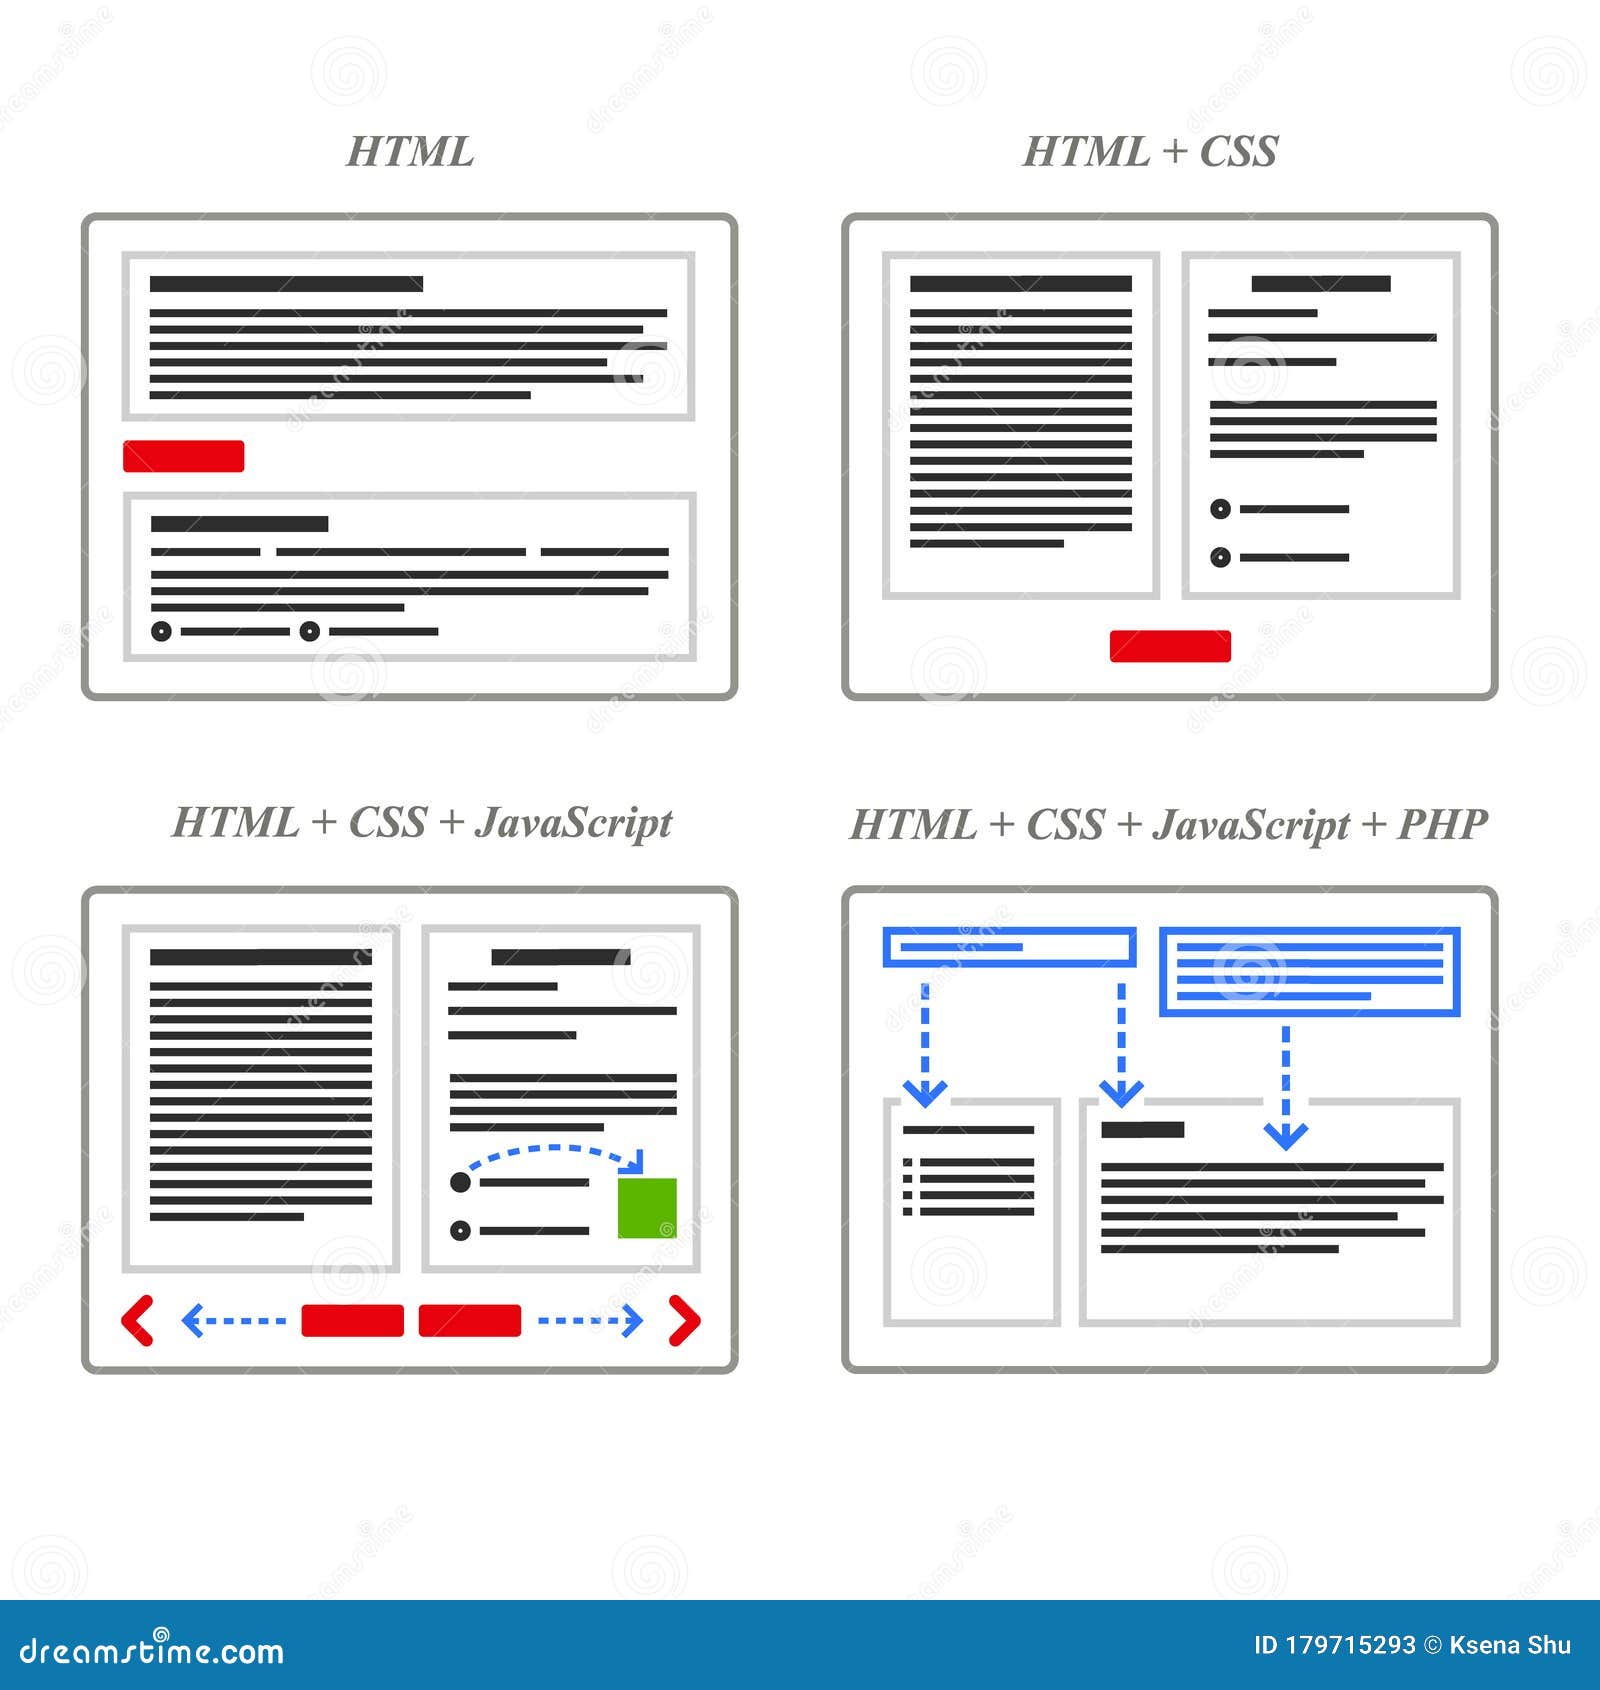 schema view for html, css, javascript and php